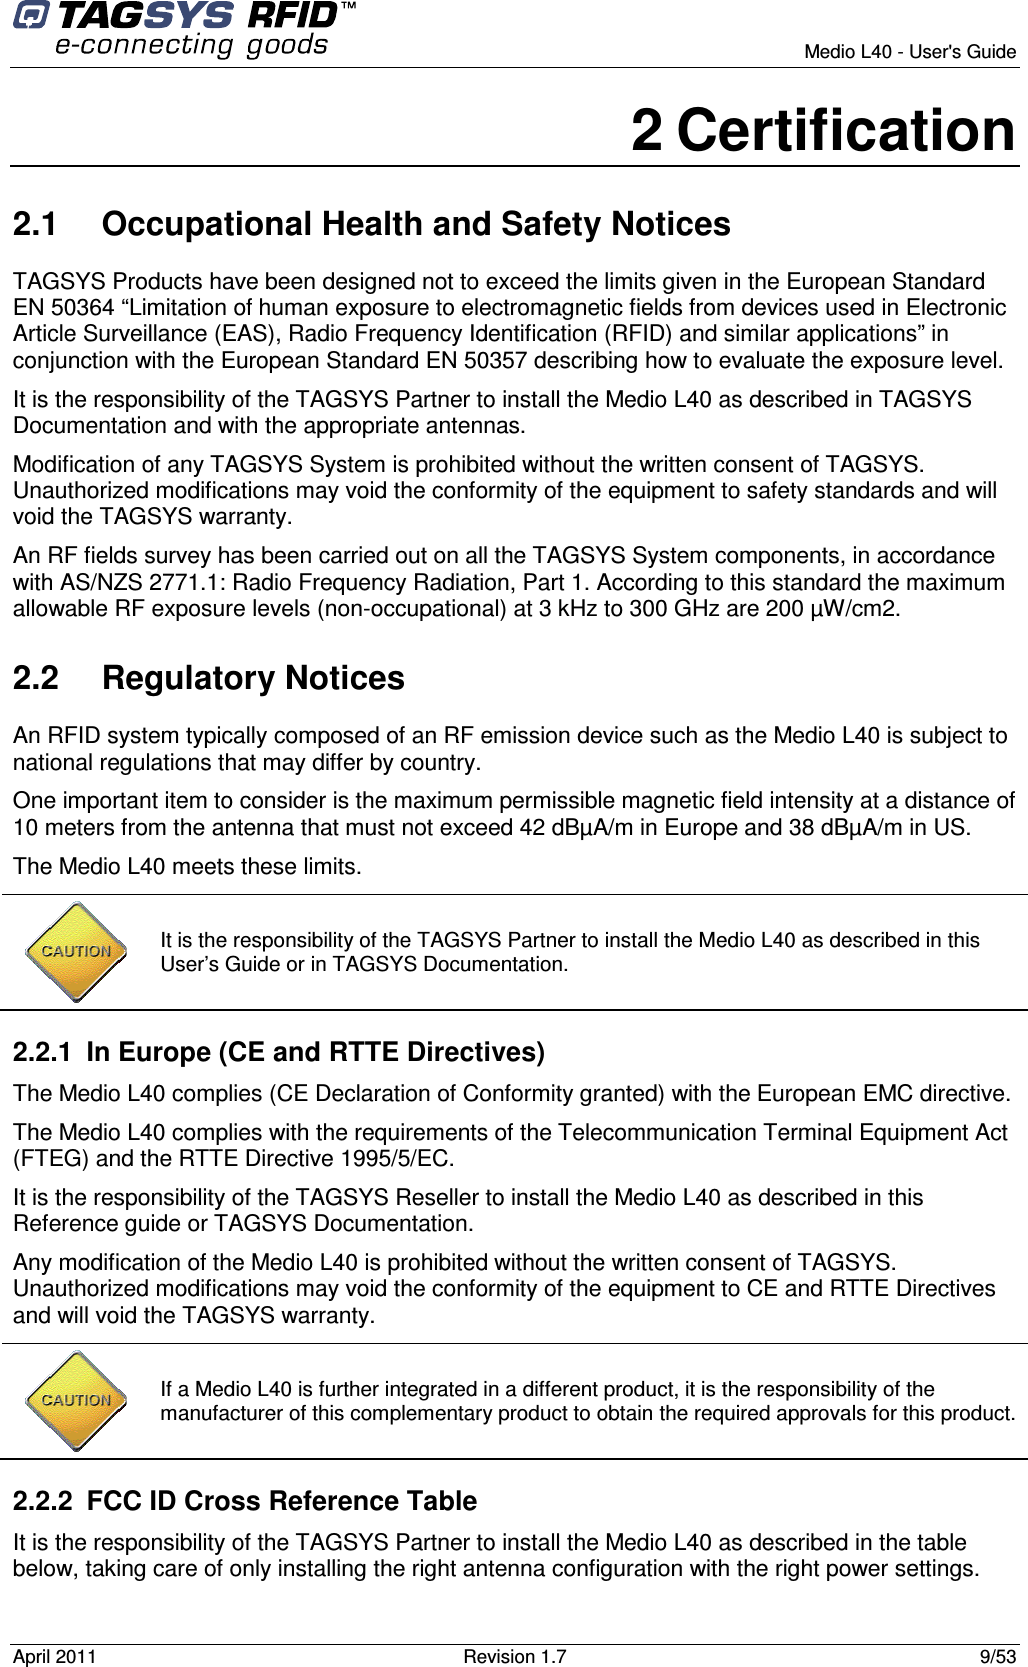        Medio L40 - User&apos;s Guide April 2011  Revision 1.7  9/53  2 Certification 2.1  Occupational Health and Safety Notices TAGSYS Products have been designed not to exceed the limits given in the European Standard EN 50364 “Limitation of human exposure to electromagnetic fields from devices used in Electronic Article Surveillance (EAS), Radio Frequency Identification (RFID) and similar applications” in conjunction with the European Standard EN 50357 describing how to evaluate the exposure level. It is the responsibility of the TAGSYS Partner to install the Medio L40 as described in TAGSYS Documentation and with the appropriate antennas.  Modification of any TAGSYS System is prohibited without the written consent of TAGSYS. Unauthorized modifications may void the conformity of the equipment to safety standards and will void the TAGSYS warranty. An RF fields survey has been carried out on all the TAGSYS System components, in accordance with AS/NZS 2771.1: Radio Frequency Radiation, Part 1. According to this standard the maximum allowable RF exposure levels (non-occupational) at 3 kHz to 300 GHz are 200 µW/cm2.  2.2  Regulatory Notices An RFID system typically composed of an RF emission device such as the Medio L40 is subject to national regulations that may differ by country. One important item to consider is the maximum permissible magnetic field intensity at a distance of 10 meters from the antenna that must not exceed 42 dBµA/m in Europe and 38 dBµA/m in US. The Medio L40 meets these limits.  2.2.1  In Europe (CE and RTTE Directives)  The Medio L40 complies (CE Declaration of Conformity granted) with the European EMC directive. The Medio L40 complies with the requirements of the Telecommunication Terminal Equipment Act (FTEG) and the RTTE Directive 1995/5/EC. It is the responsibility of the TAGSYS Reseller to install the Medio L40 as described in this Reference guide or TAGSYS Documentation. Any modification of the Medio L40 is prohibited without the written consent of TAGSYS. Unauthorized modifications may void the conformity of the equipment to CE and RTTE Directives and will void the TAGSYS warranty.  2.2.2  FCC ID Cross Reference Table It is the responsibility of the TAGSYS Partner to install the Medio L40 as described in the table below, taking care of only installing the right antenna configuration with the right power settings.  It is the responsibility of the TAGSYS Partner to install the Medio L40 as described in this User’s Guide or in TAGSYS Documentation.  If a Medio L40 is further integrated in a different product, it is the responsibility of the manufacturer of this complementary product to obtain the required approvals for this product. 